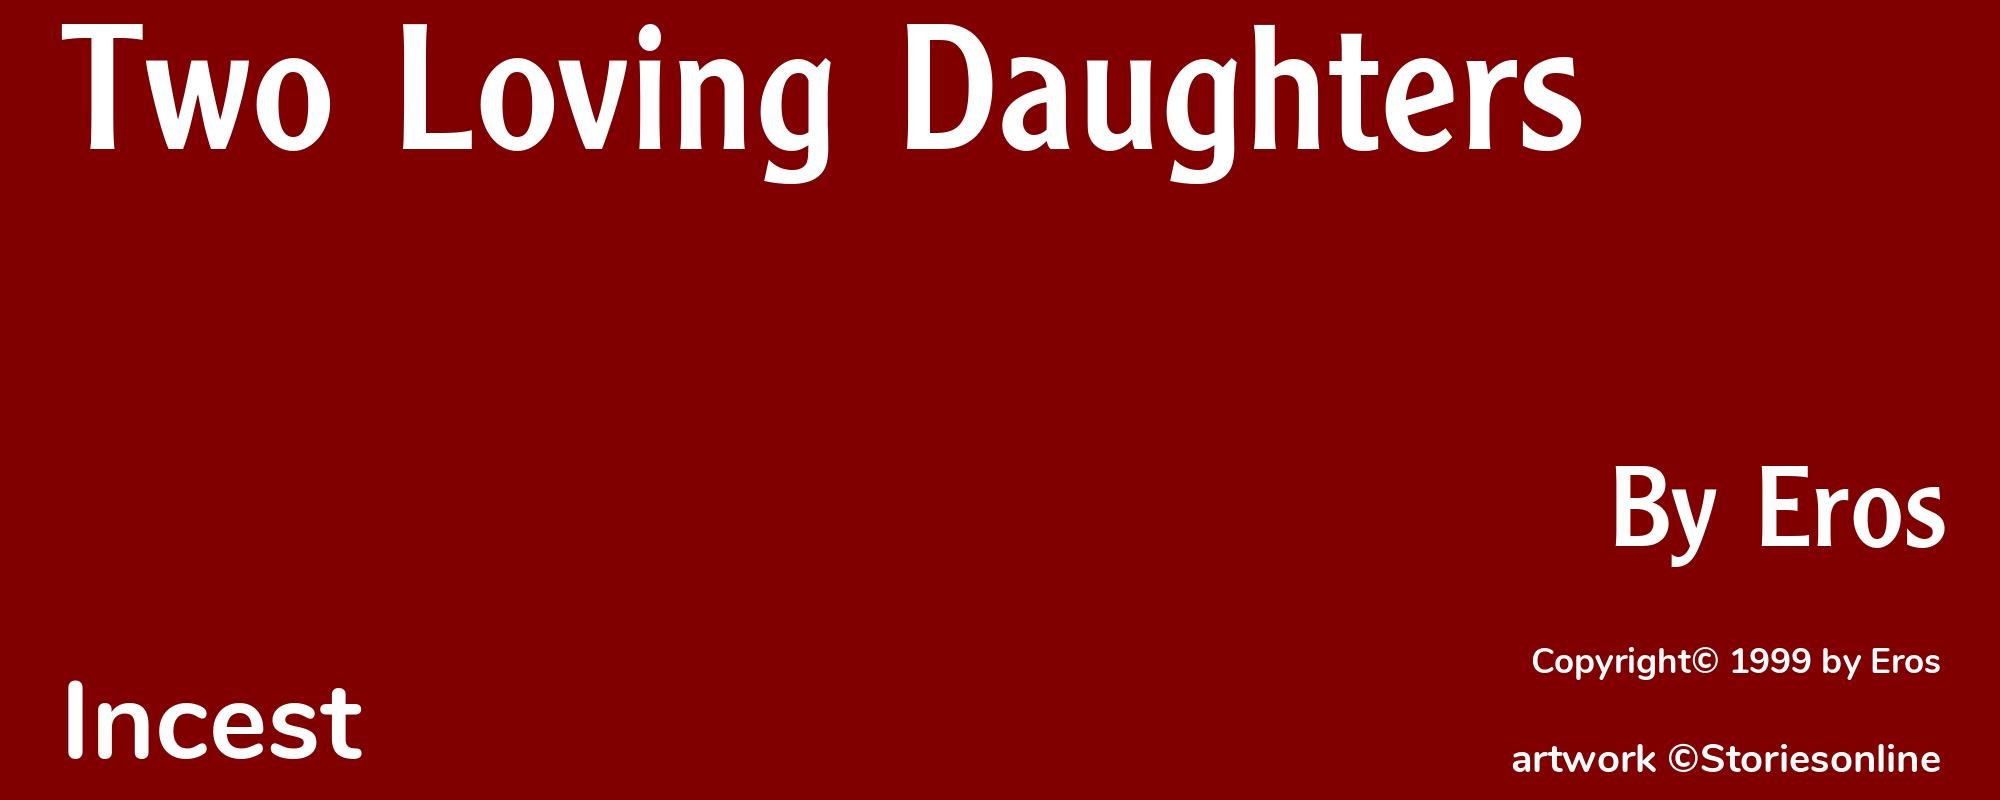 Two Loving Daughters - Cover